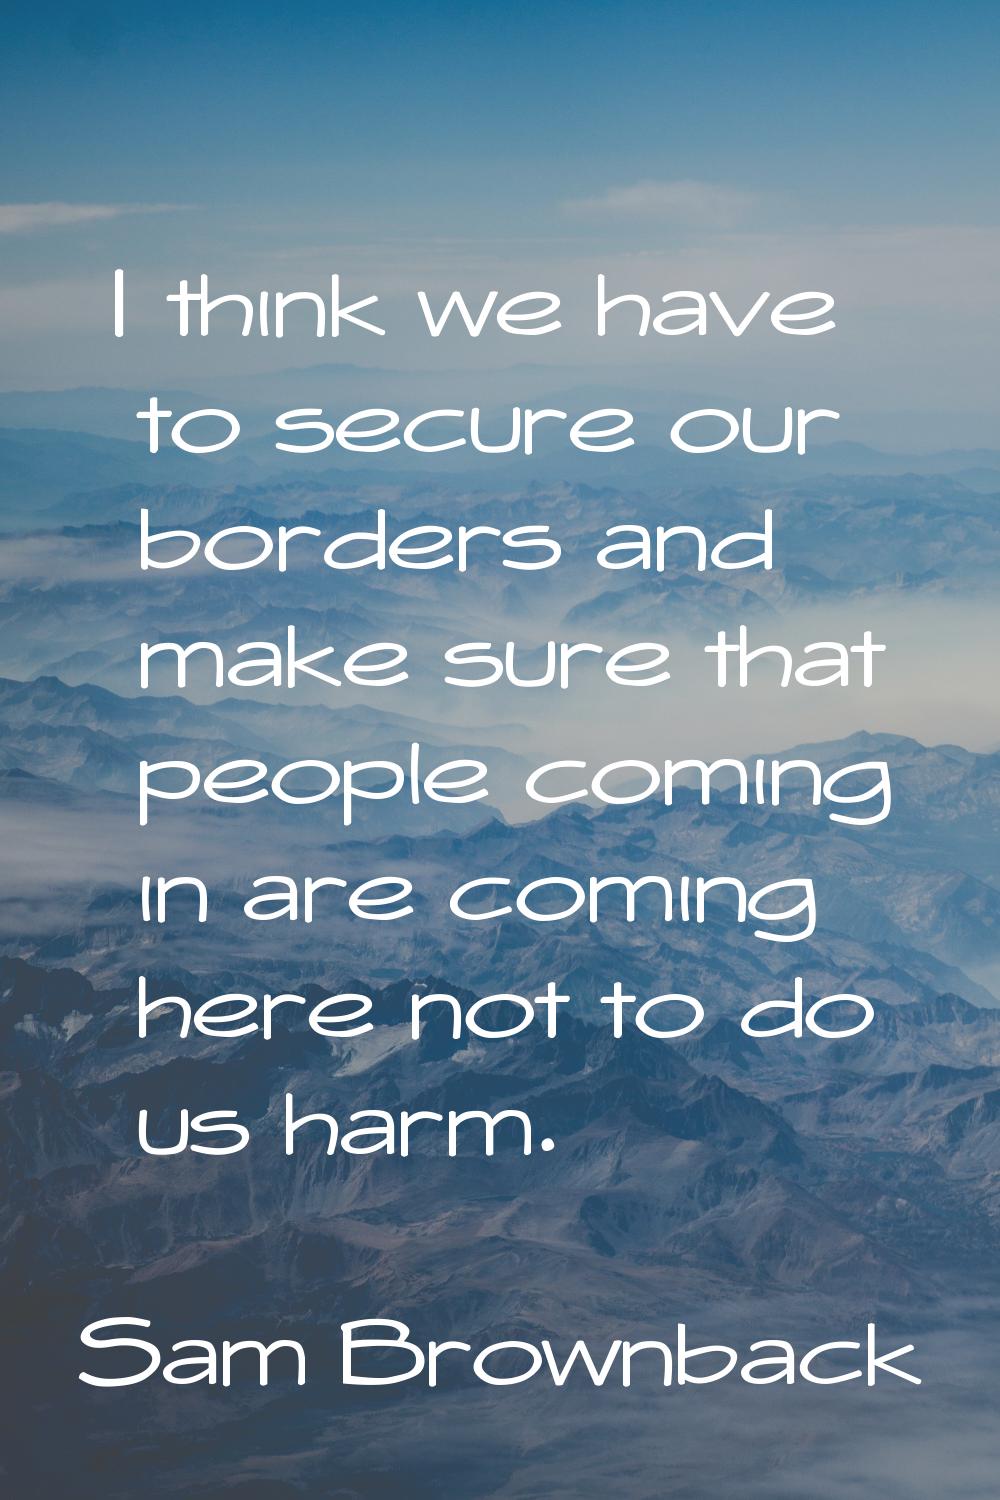 I think we have to secure our borders and make sure that people coming in are coming here not to do